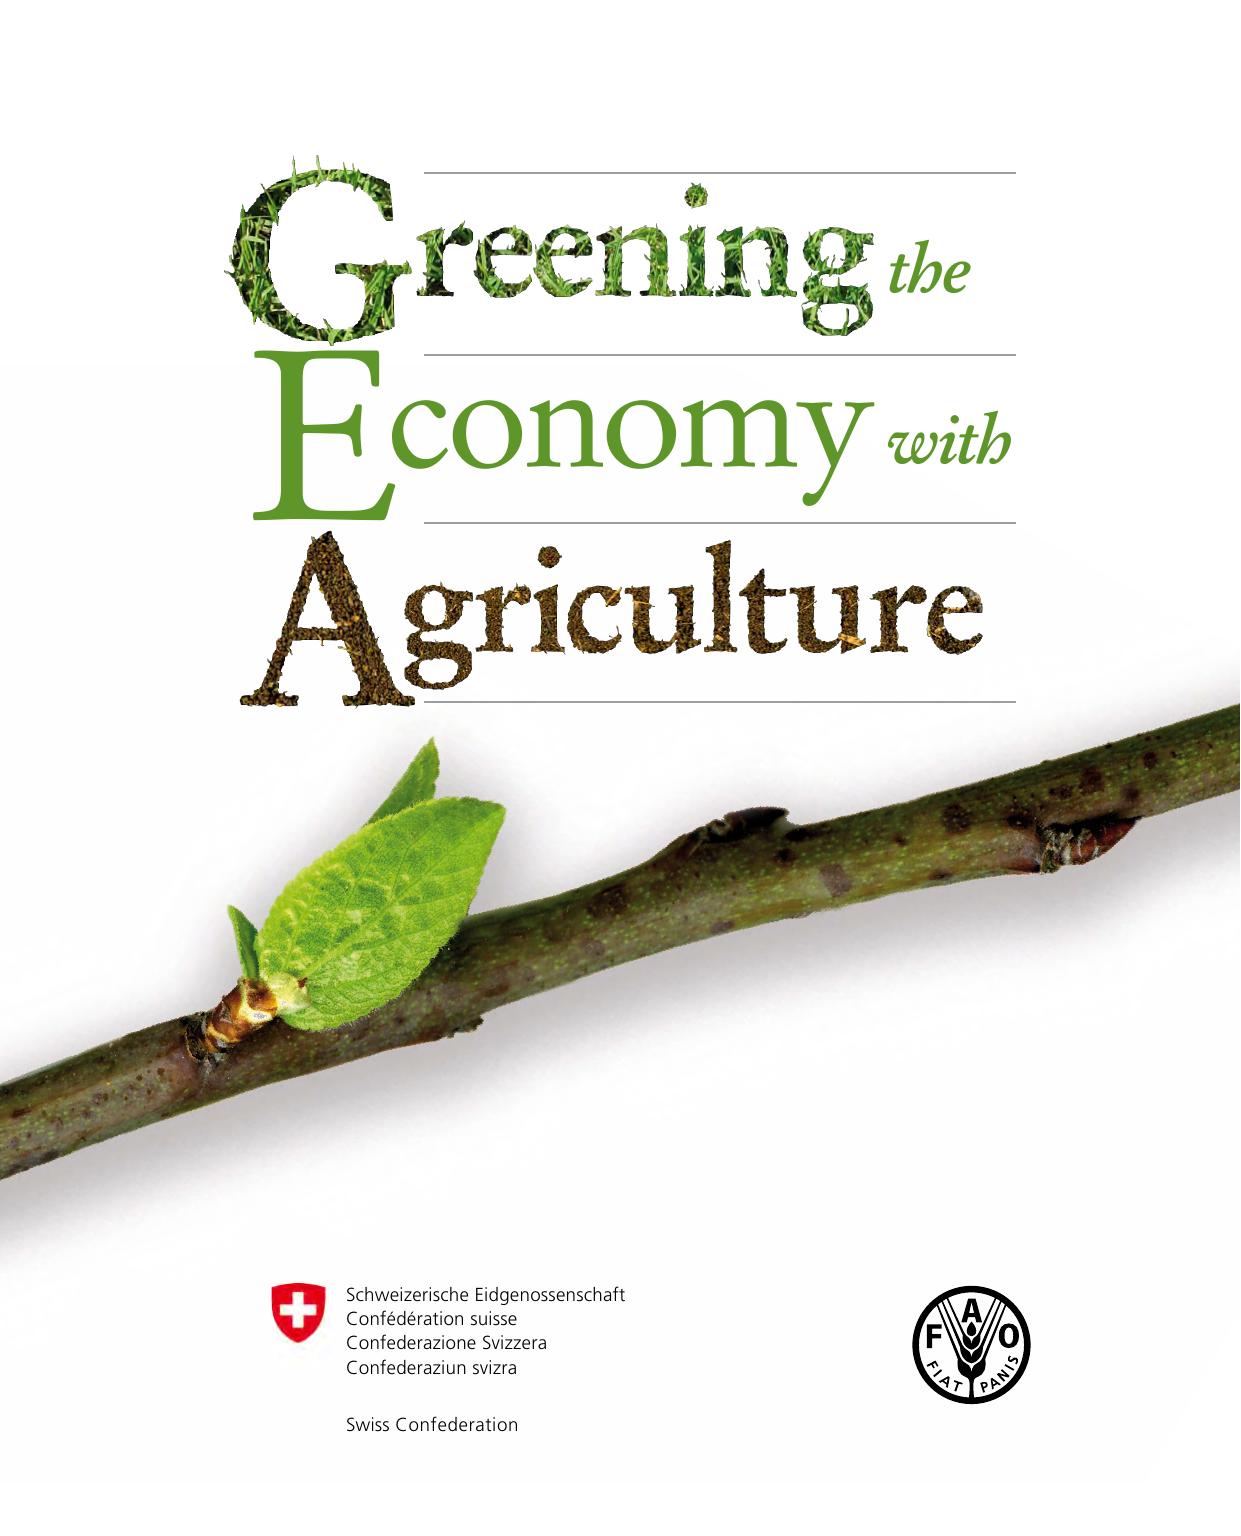 Greening the Economy with Agriculture 2012